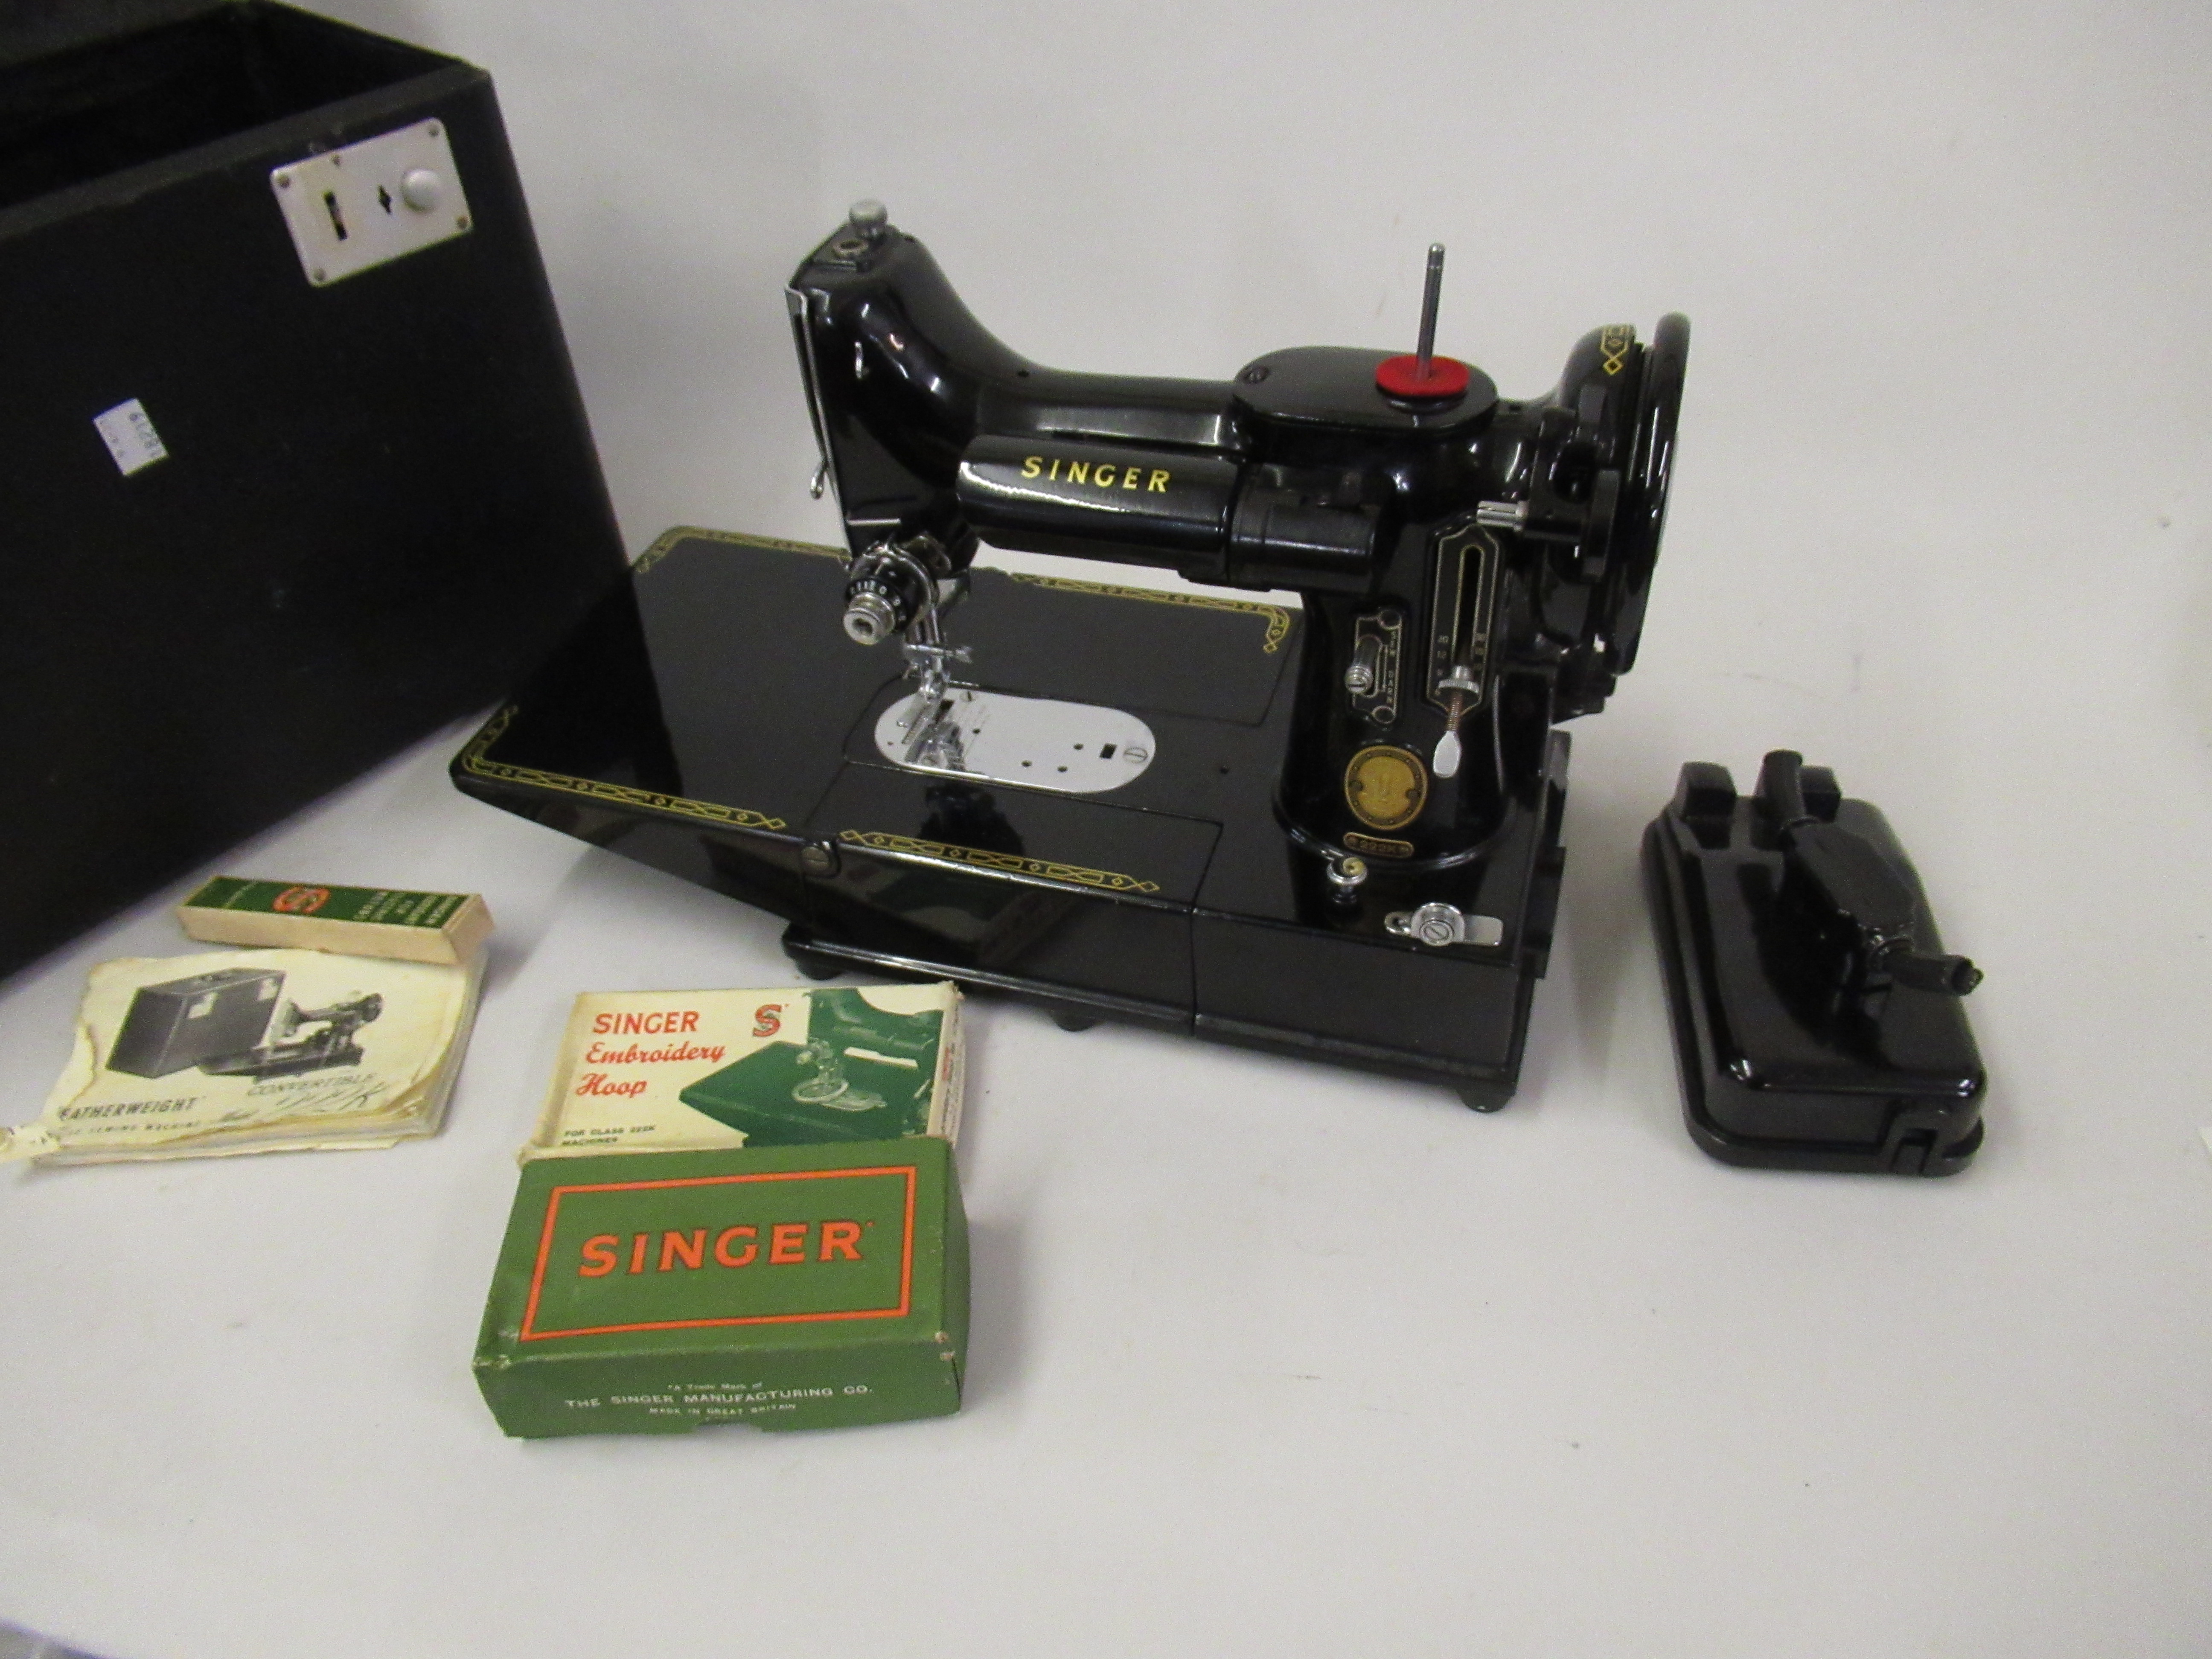 Singer Featherweight sewing machine, model CAK7-12, in original fitted case with accessories